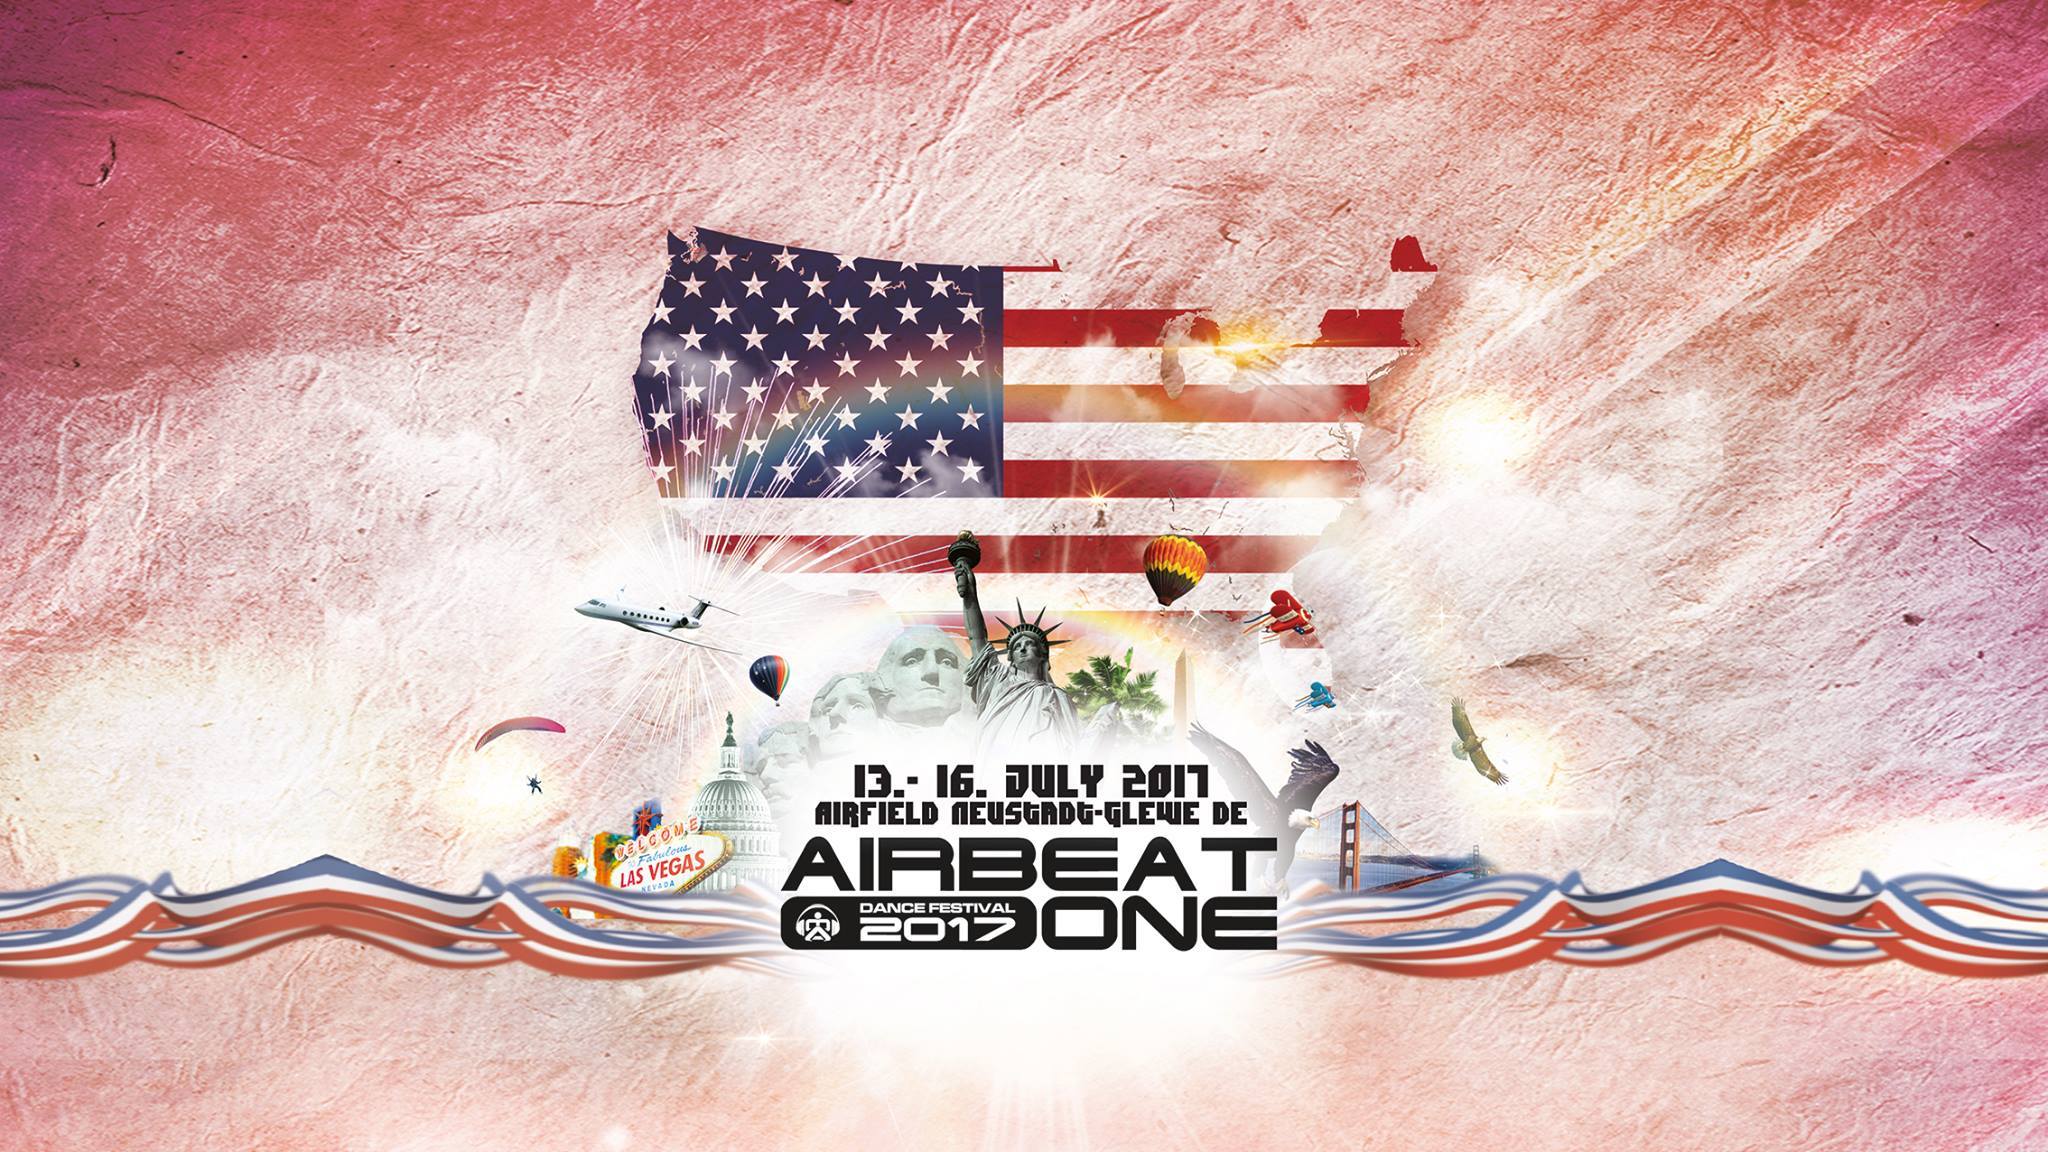 AIRBEAT one festival